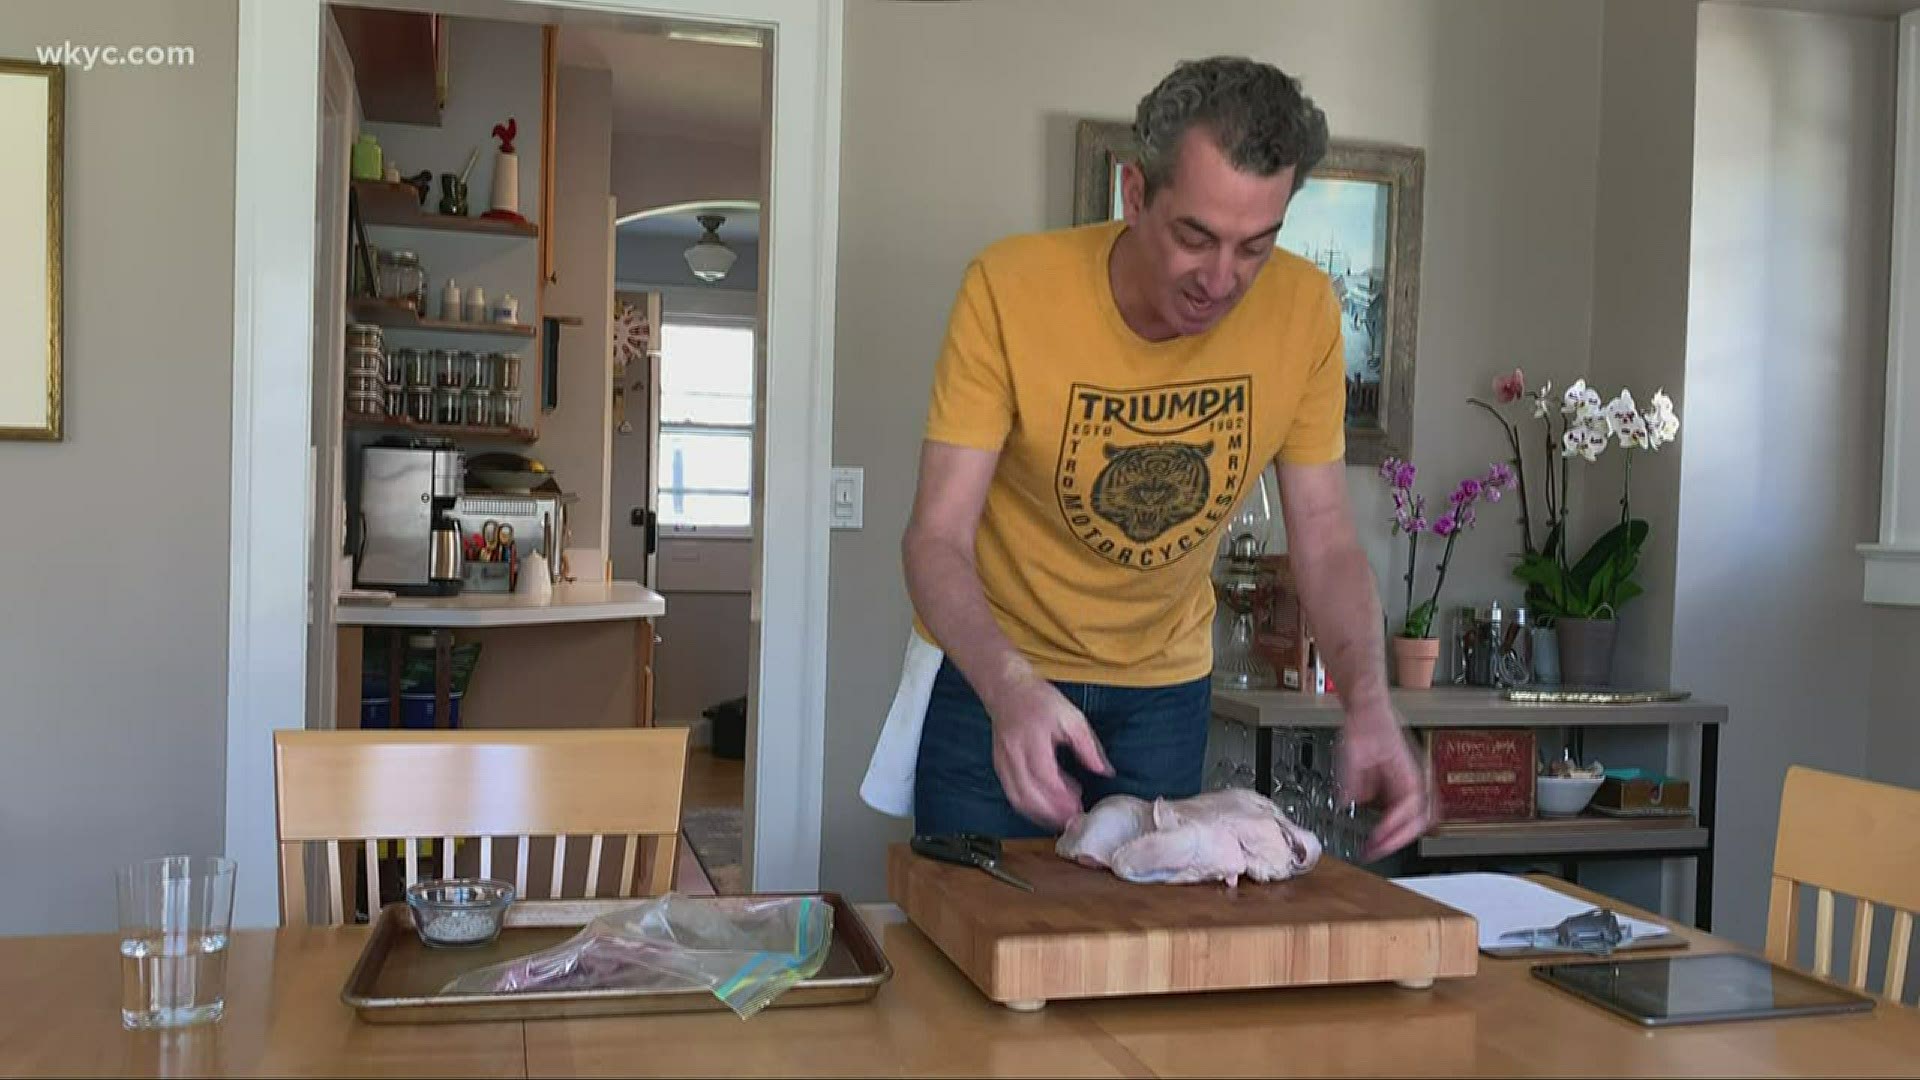 Food expert Doug Trattner is trading his interview hat for a chef's hat with some step by step recipes during this time. What your favorite way to cook chicken?